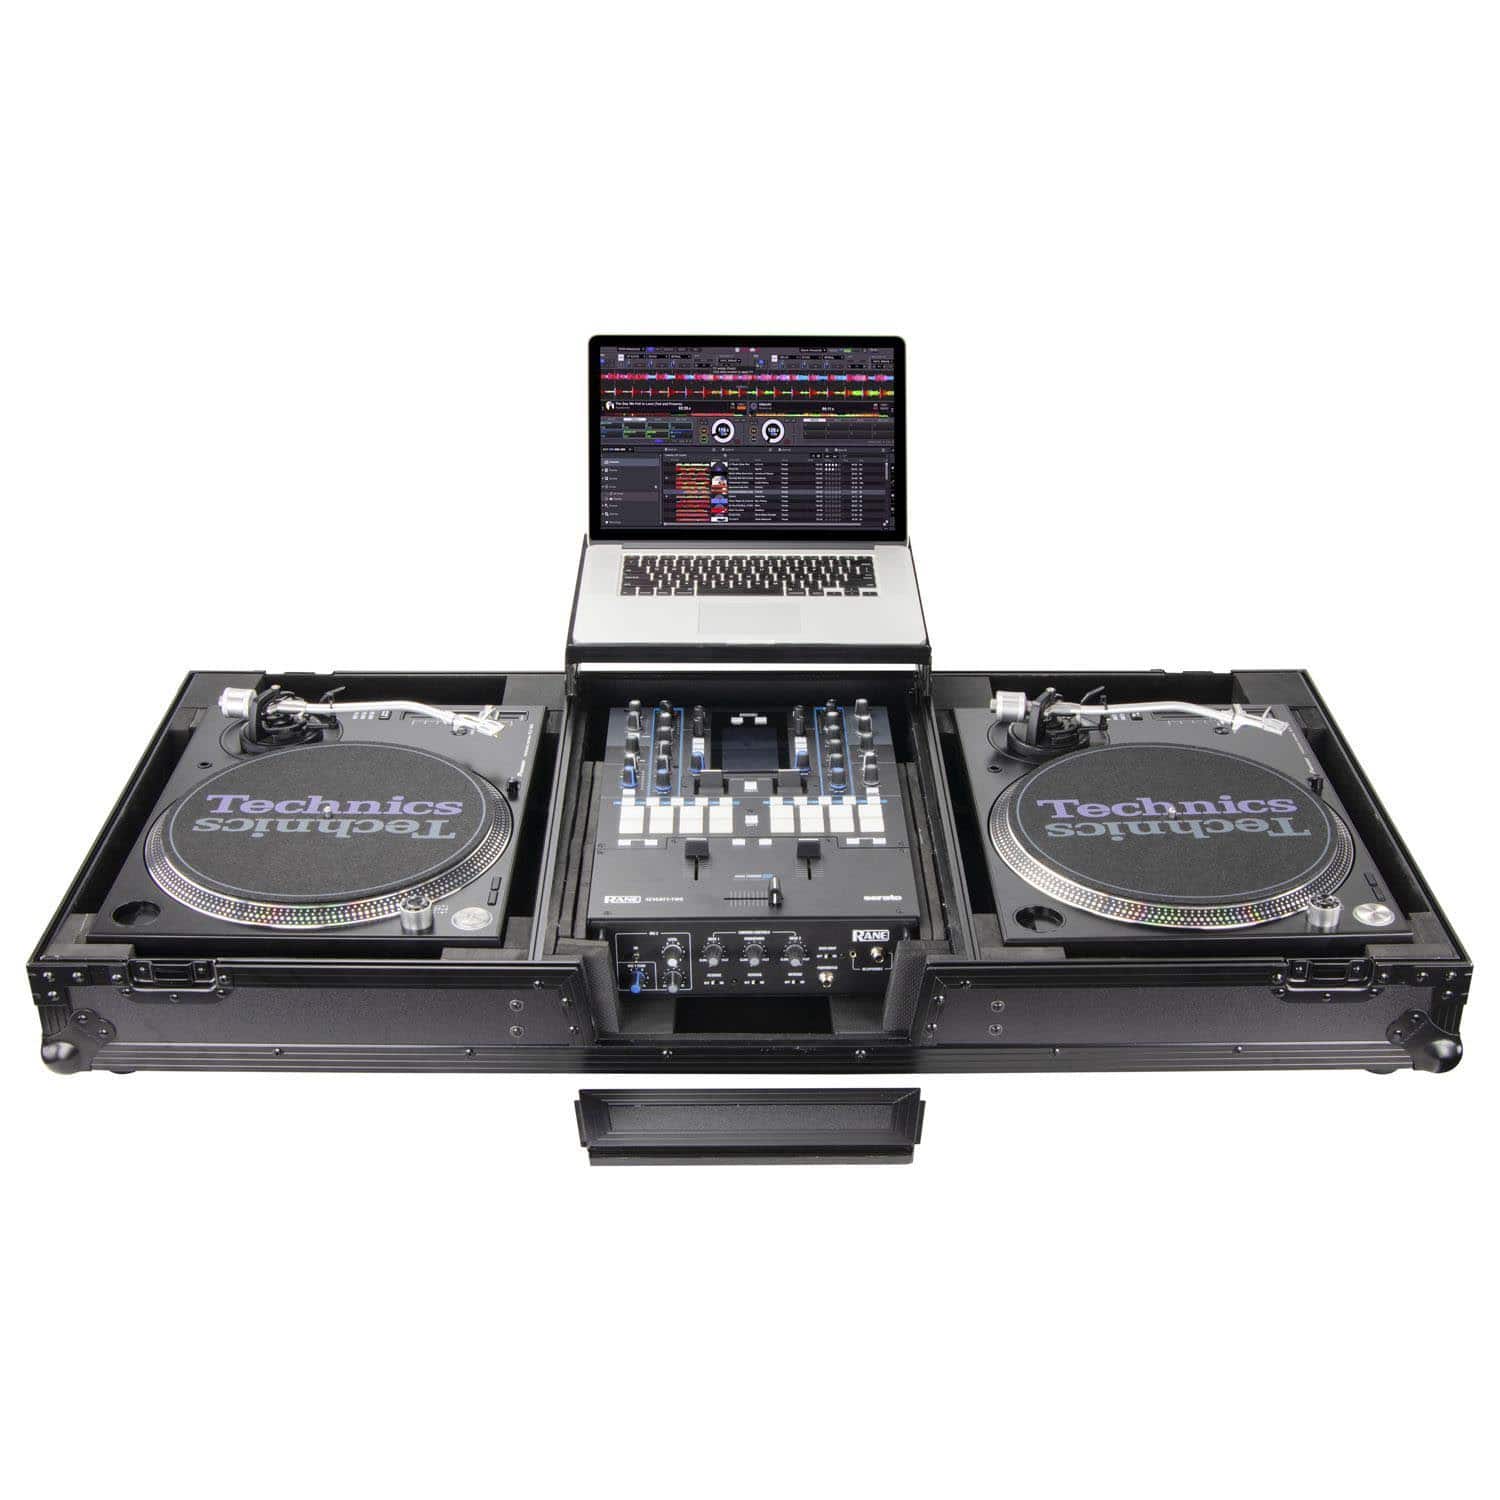 Odyssey FZGSLBM12WRBL Black Low Profile 12″ Format DJ Mixer and Two Battle Position Turntables Flight Coffin Case with Wheels and Glide Platform - Hollywood DJ